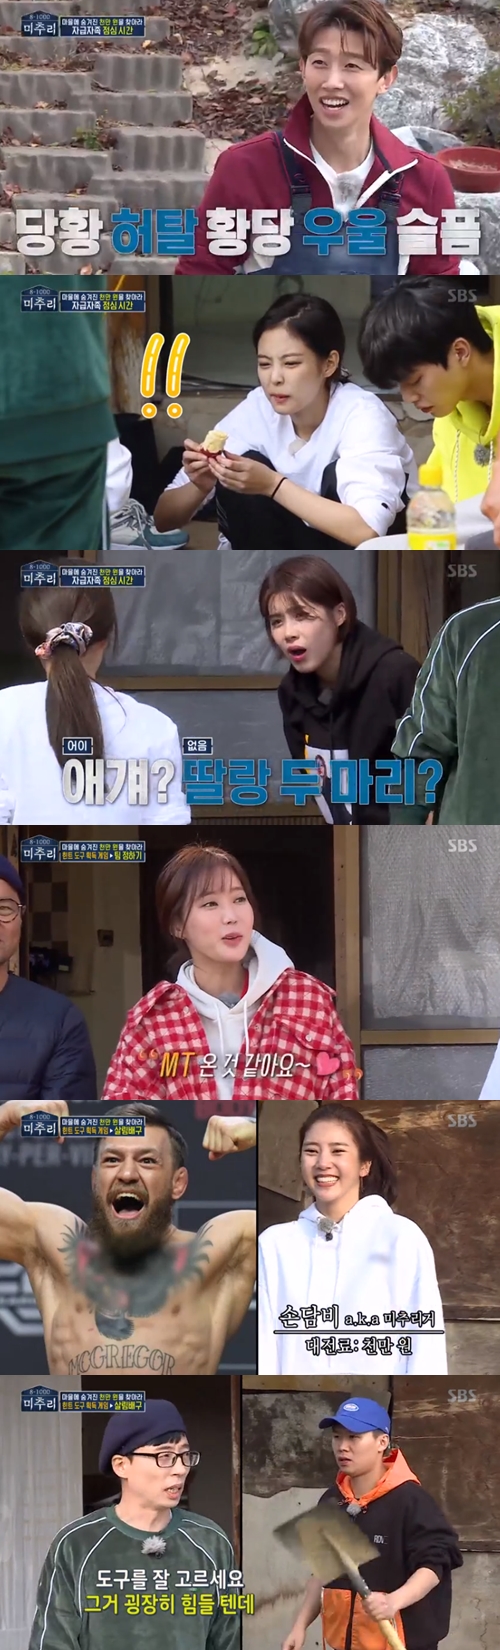 Michu and 8 members started a laughing journey for 10 million won.On the 16th, SBS entertainment program Michu and 8 - 1000 (hereinafter referred to as Michu and) was shown members looking for hints for 10 million won hidden in the village.Eight members gathered together on the day. Yoo Jae-seok, who last appeared, said, I will live in isolation from now on.It is thoroughly controlled here, he declared, and needless goods should be returned to the independent life.In Songgangs bag, a cartoon character Chungu doll came out, and Songgang said, I brought it because I liked Changu. Then Jenny asserted, There is no item to return.Yang Se-heeong then quipped numbly, Mr Jenny, you have to take the cuteness away.Then Son Dam-bi, who was next to him, laughed, saying, I really want to hit one.The members learned about the secrets about Michu and the village. They had to find 10 million won hidden for one night and two days.Before entering the village, they chose one different item for their isolation, which was a hint tool that would be useful for finding 10 million won.Jenny was very impressed by the fact that 10 million won was hidden. There are four members, he said, laughing.Songgang also said, I will eat beef if I get 10 million won.Then they dispersed and started preparing for lunch. Kim Sang-ho and Jang Doyeon started to pick sweet potatoes.Jang Doyeon was alert for a 10 million won hint and found a questionable red stone.Kang Ki-young also found a red stone while fishing and quickly picked it up; his earlier choice was a hammer, and he used a hammer to break a red stone to obtain a hint.Joy also noticed this for a while, and found a red stone, no matter what you did.Jenny struggled to find a hint: he found a toaster in the kitchen and put his bread into the toaster, which he had chosen earlier.Yang Se-heeong found this, and embarrassed Jenny said, Please show me the palace once.Jenny baked bread in the repeated interruption of Yang Se-heeong, and soon found the HOT mark on the back of the bread.The dinner members started a hint tool acquisition game. Yoo Jae-seoks first question was, Ive dated an entertainer.When the members rebelled, Yoo Jae-seok shouted, I am not interested in other peoples love affairs.Jang Doyeon replied yes, while Son Dam-bi chastised him, saying dont lie; then Jang Doyeon said: Its not on the gag side.I heard a little bit before, and the nickname is Min, Yang Se-heeong said.When asked I want to go home, all members except Yang Se-heeong and Kang Ki-young answered yes.Im Soo-hyang said, Its fun, I want to go home, Yang Se-hyeong said, Jang Doyeon does not want to go home, but sits down to fart.Eventually, the Kang Ki-young team was teamed by Songgang - Im Soo-hyang - Jenny, and Kim Sang-ho team consisted of Yang Se-heeong - Jang Doyeon - Son Dam-bi.The first event was Salim Volleyball; Jenny and Im Soo-hyang showed off an unexpected sharp serve.On the other hand, Jang Doyeon and Son Dam-bi failed to turn one over to the net; in particular, Jang Doyeon blew the ball over the roof and emanated a fuss.So Son Dam-bi threw out the basin and was irritated.After a fierce battle, Kim Sang-hos team won, and they copied Kang Ki-youngs tool, the hammer.On the other hand, Michu and is broadcast every Friday at 9:55 pm.Photo SBS broadcast screen capture